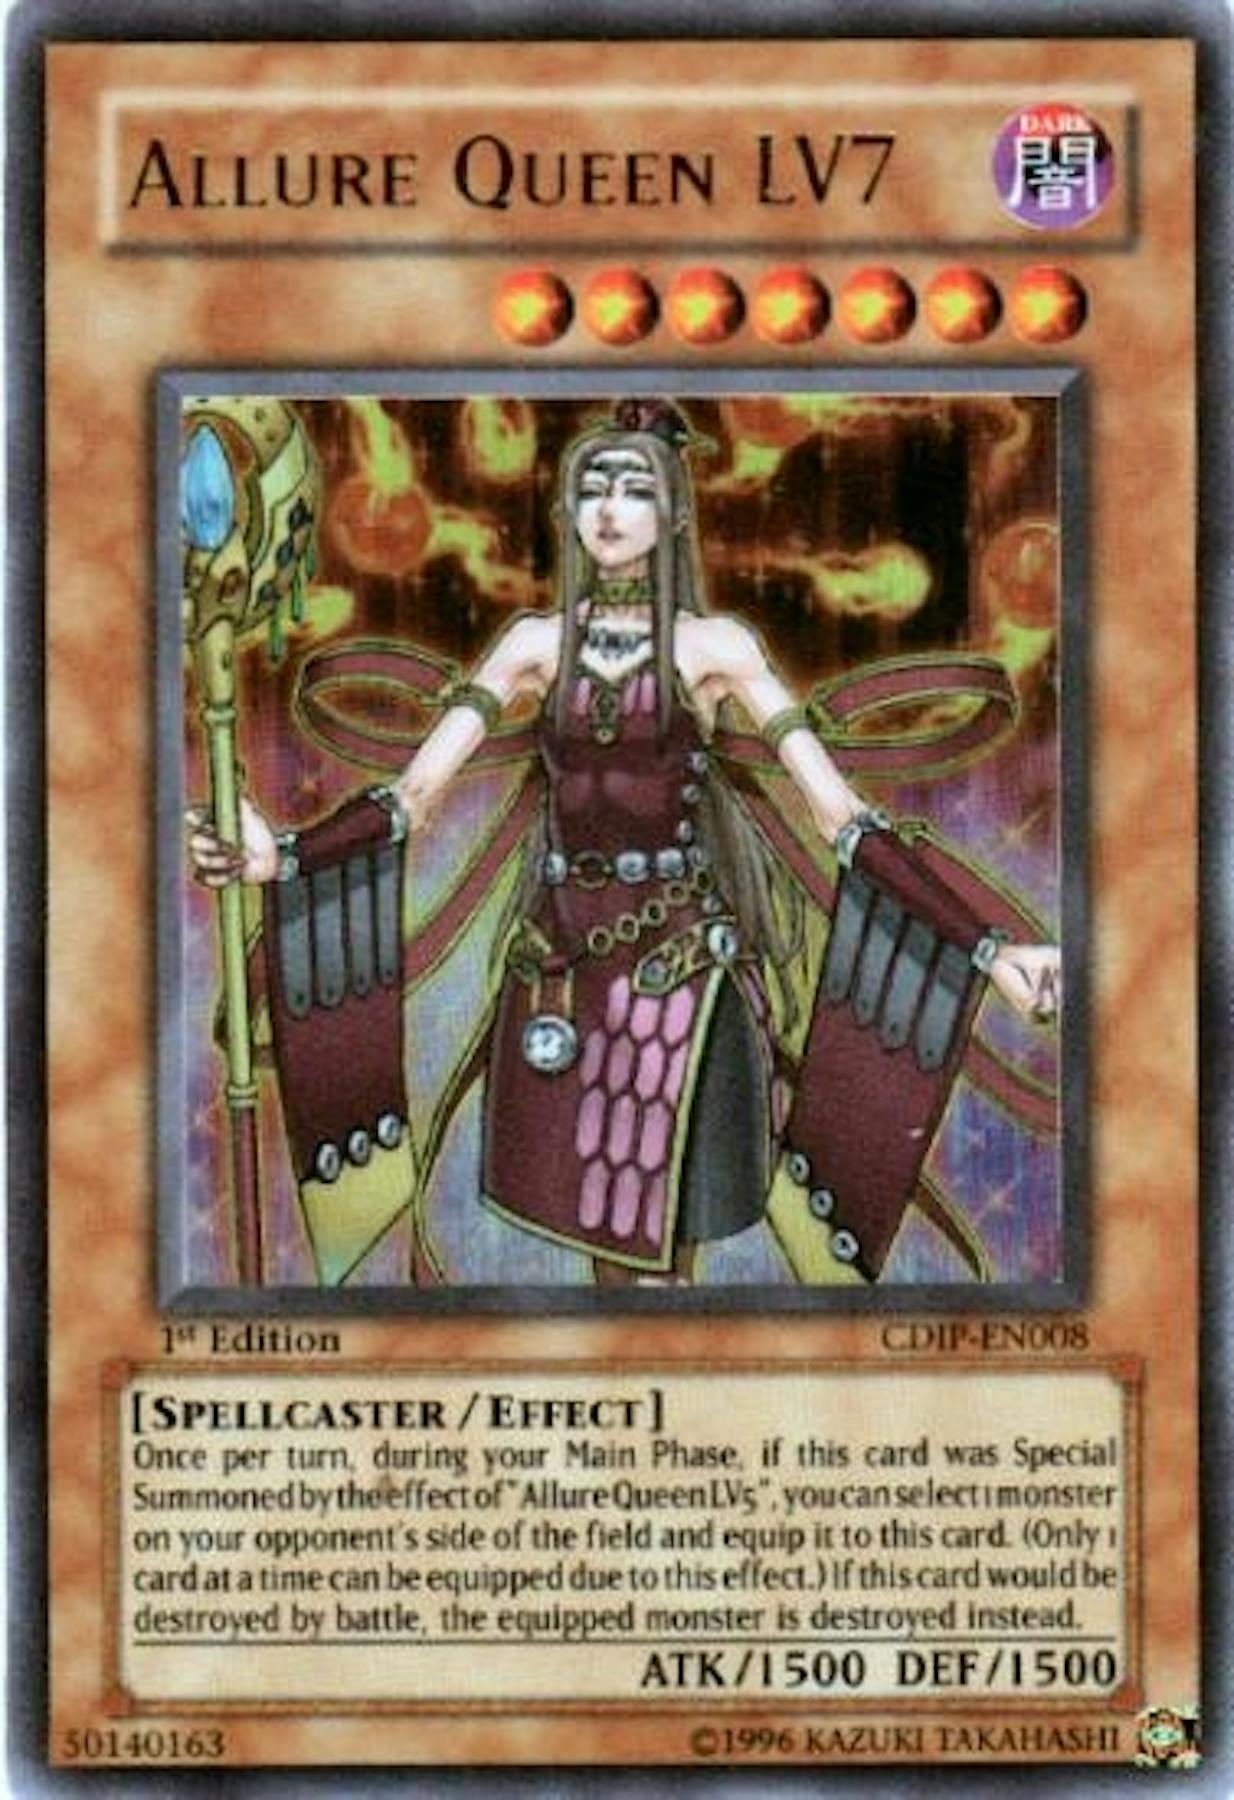 Allure Queen LV7 - Yu-Gi-Oh Cards - Out of Games